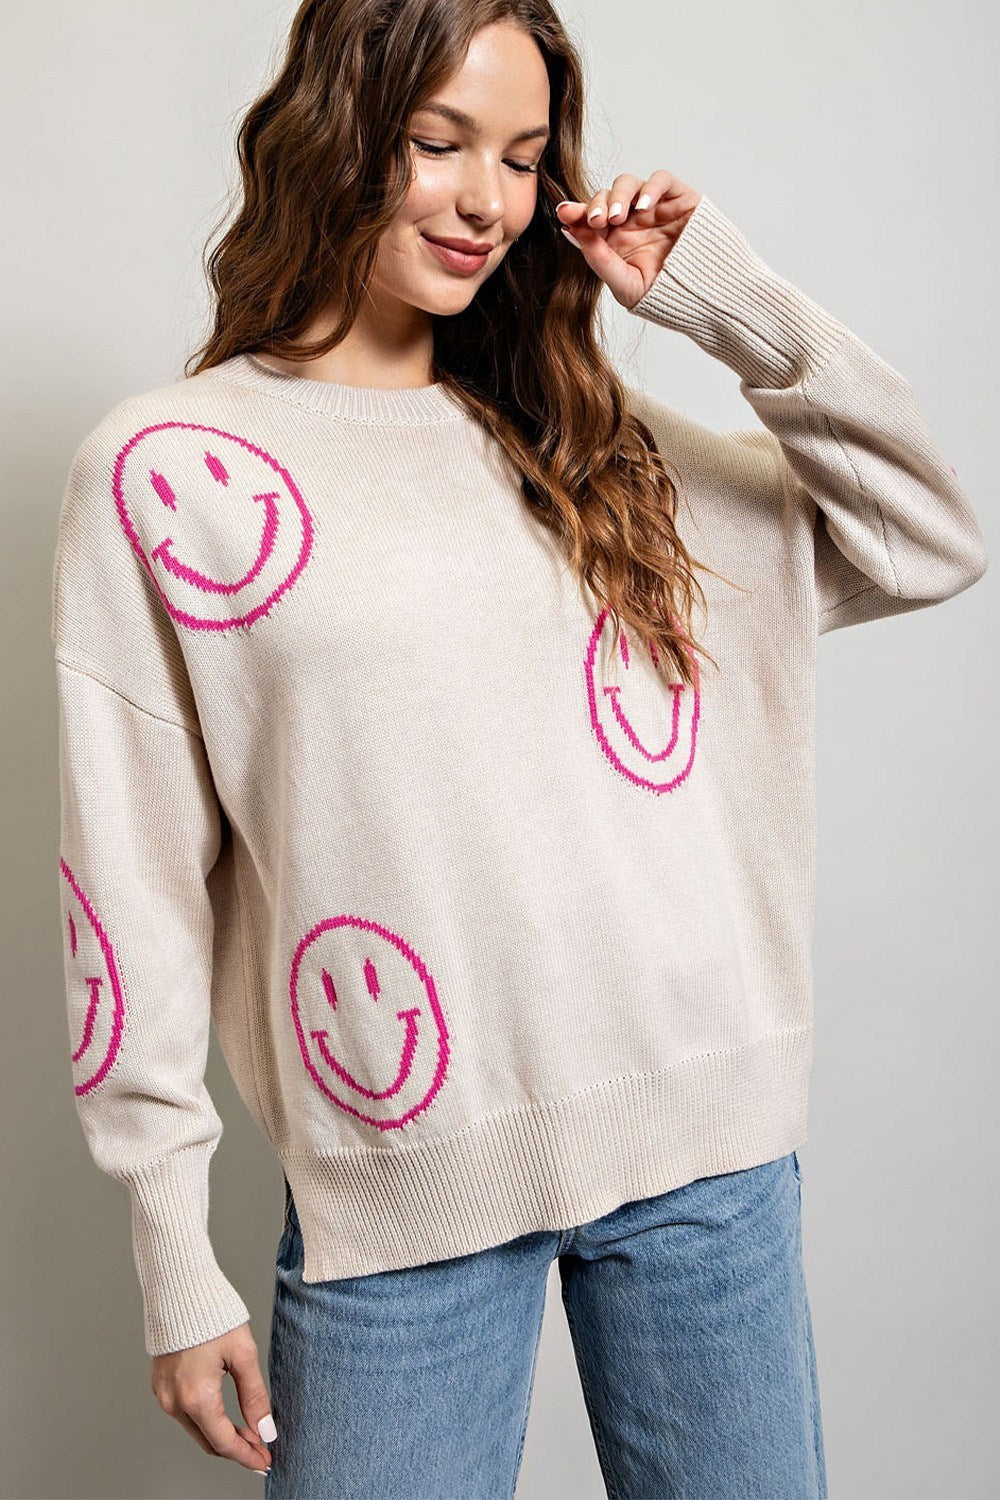 Happy Days Sweater-2 Colors Available